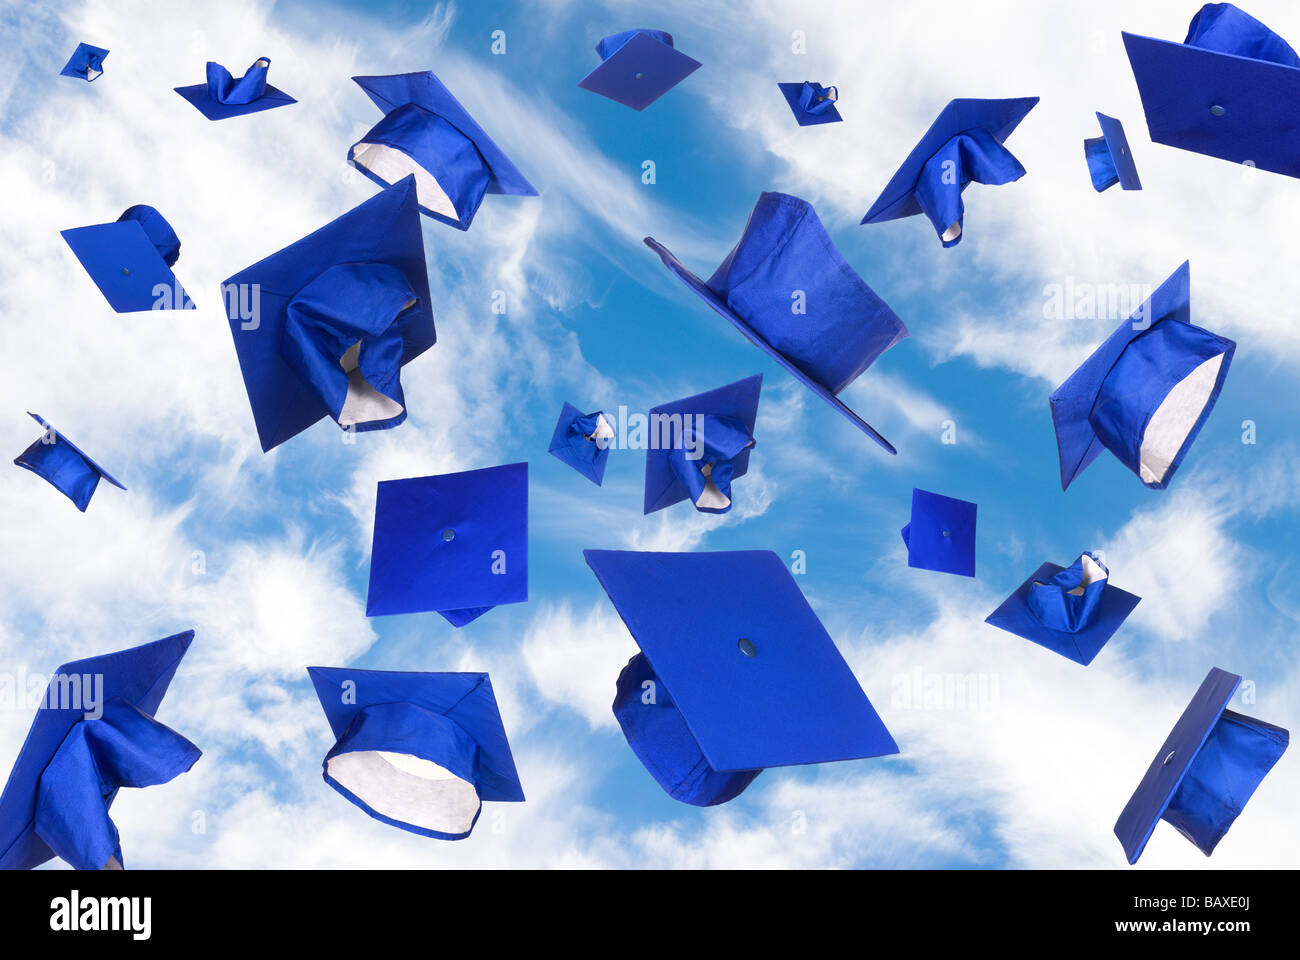 Graduation caps fly in the air in a moment of celebration Stock Photo